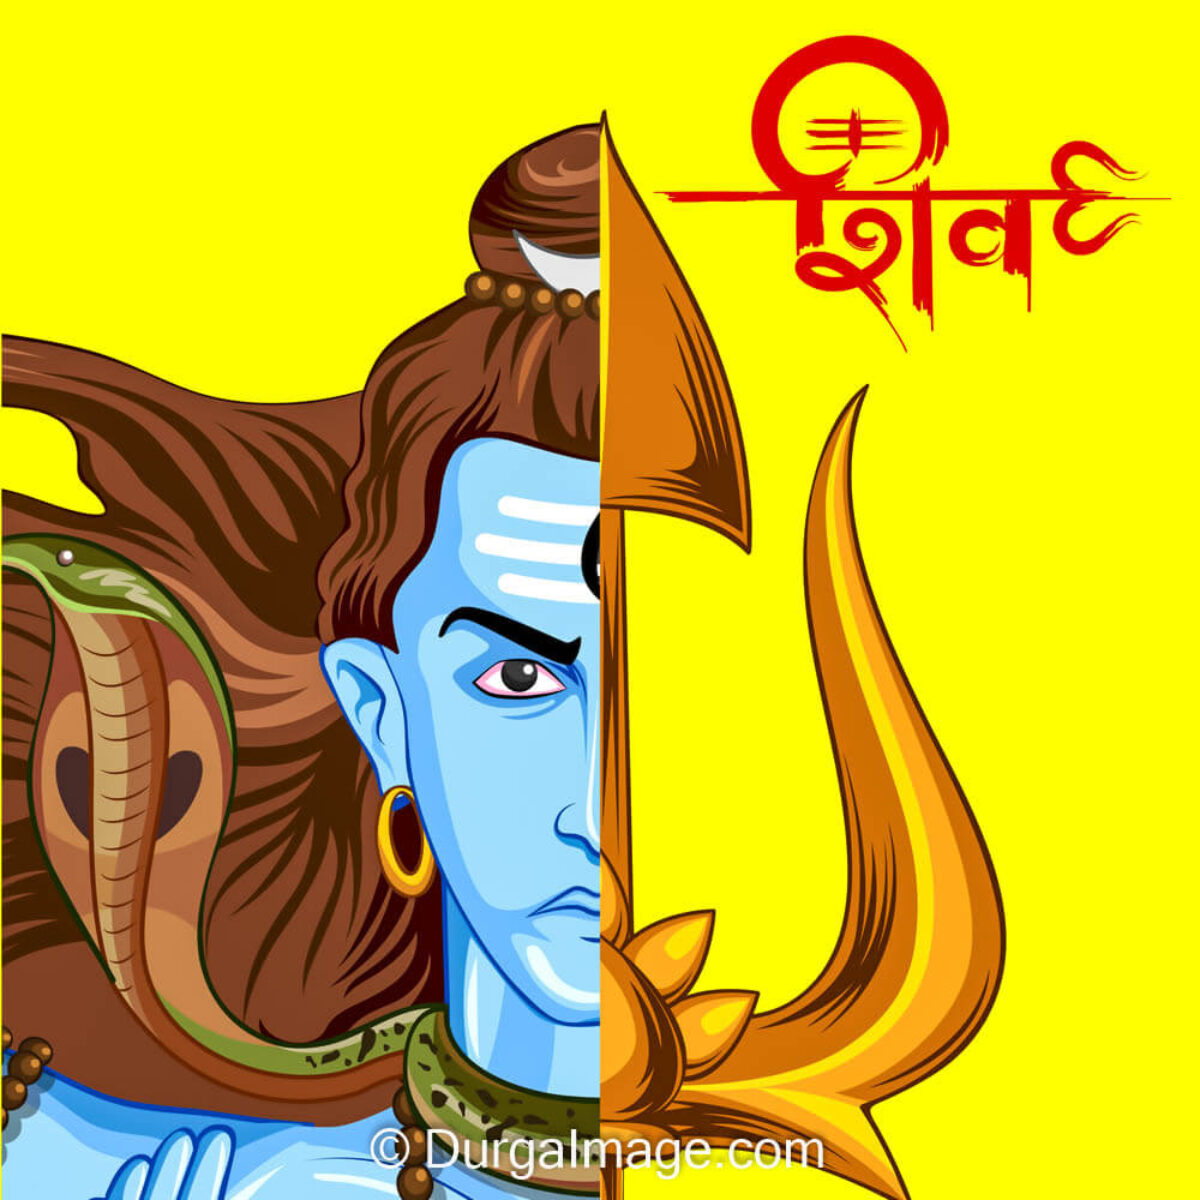 108 Lord Shiva Quotes and Status Images in 2021